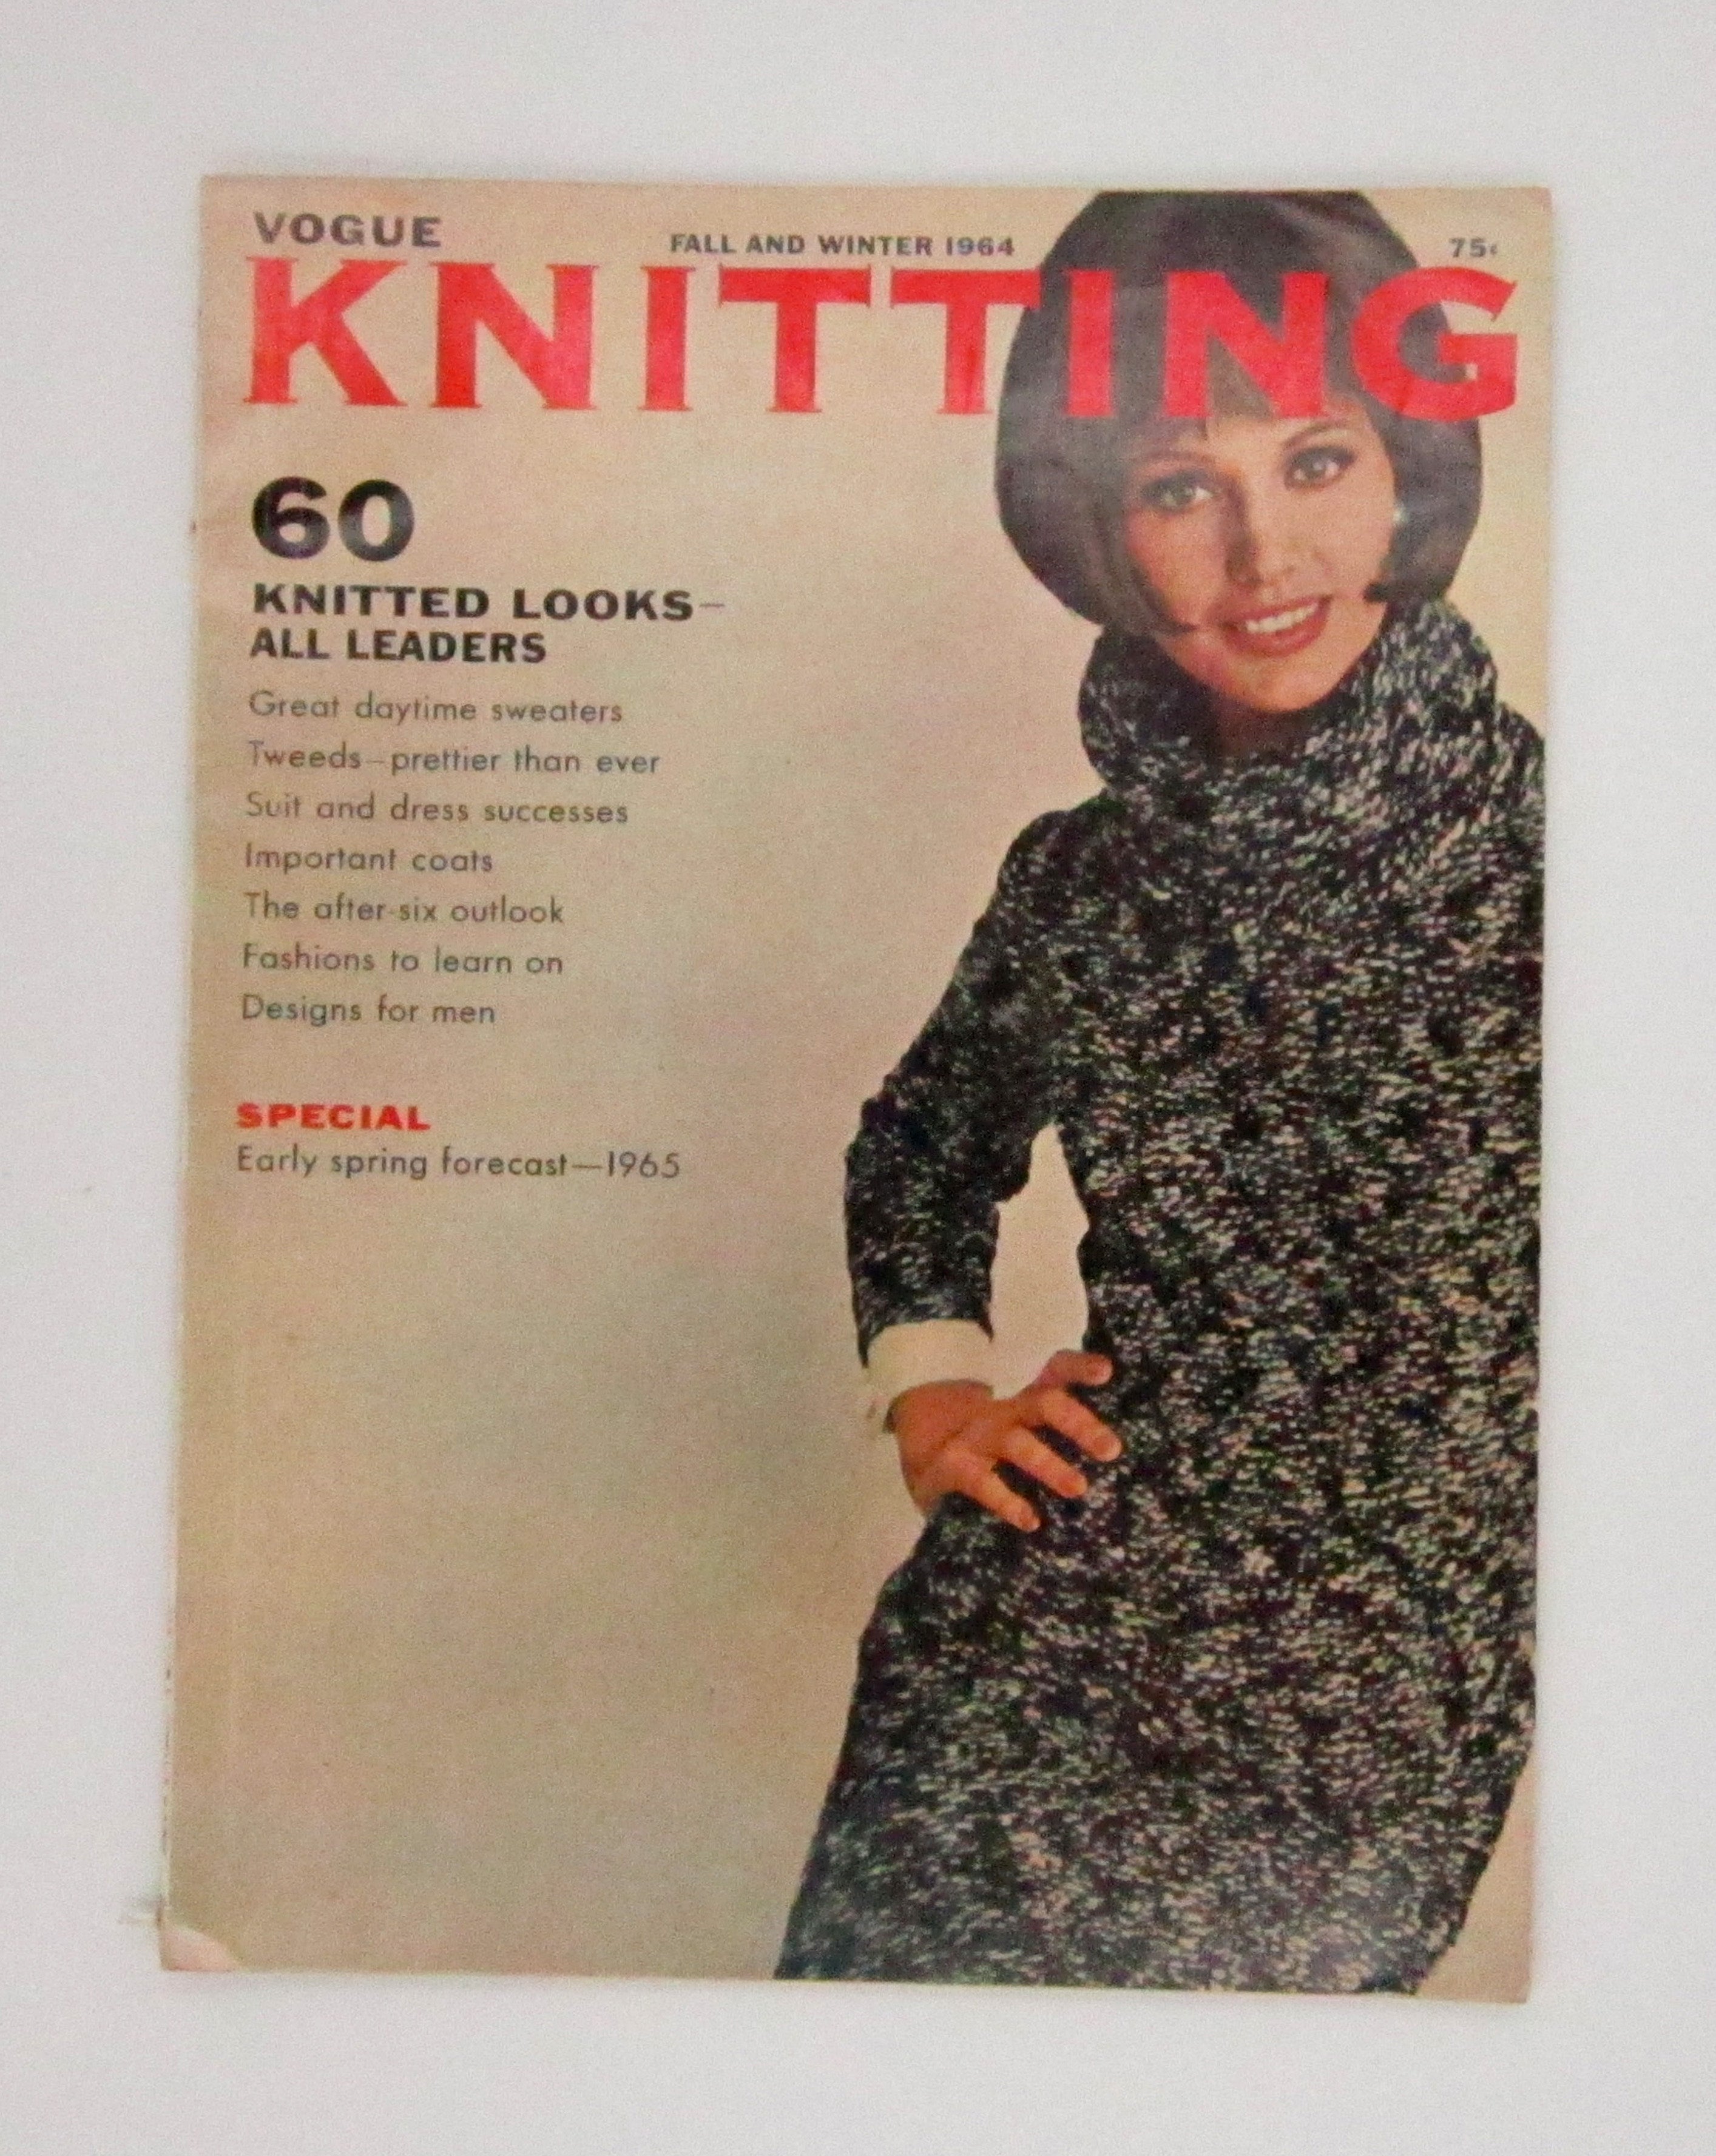 Vintage Vogue Knitting Magazine - Fall and Winter 1964 - D & L  Vintage 